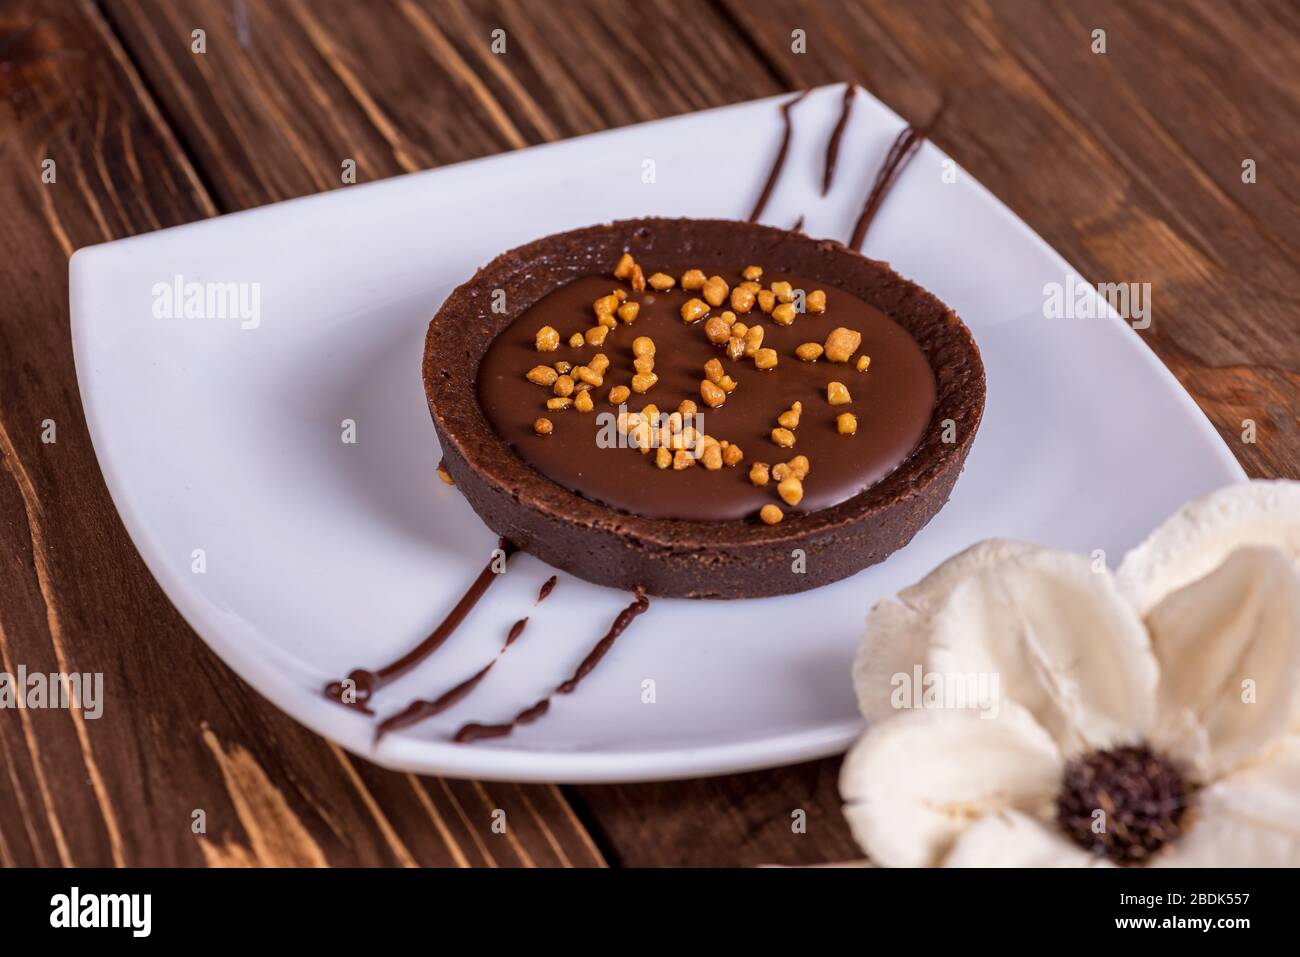 A slice of chocolate cake on table. Stock Photo